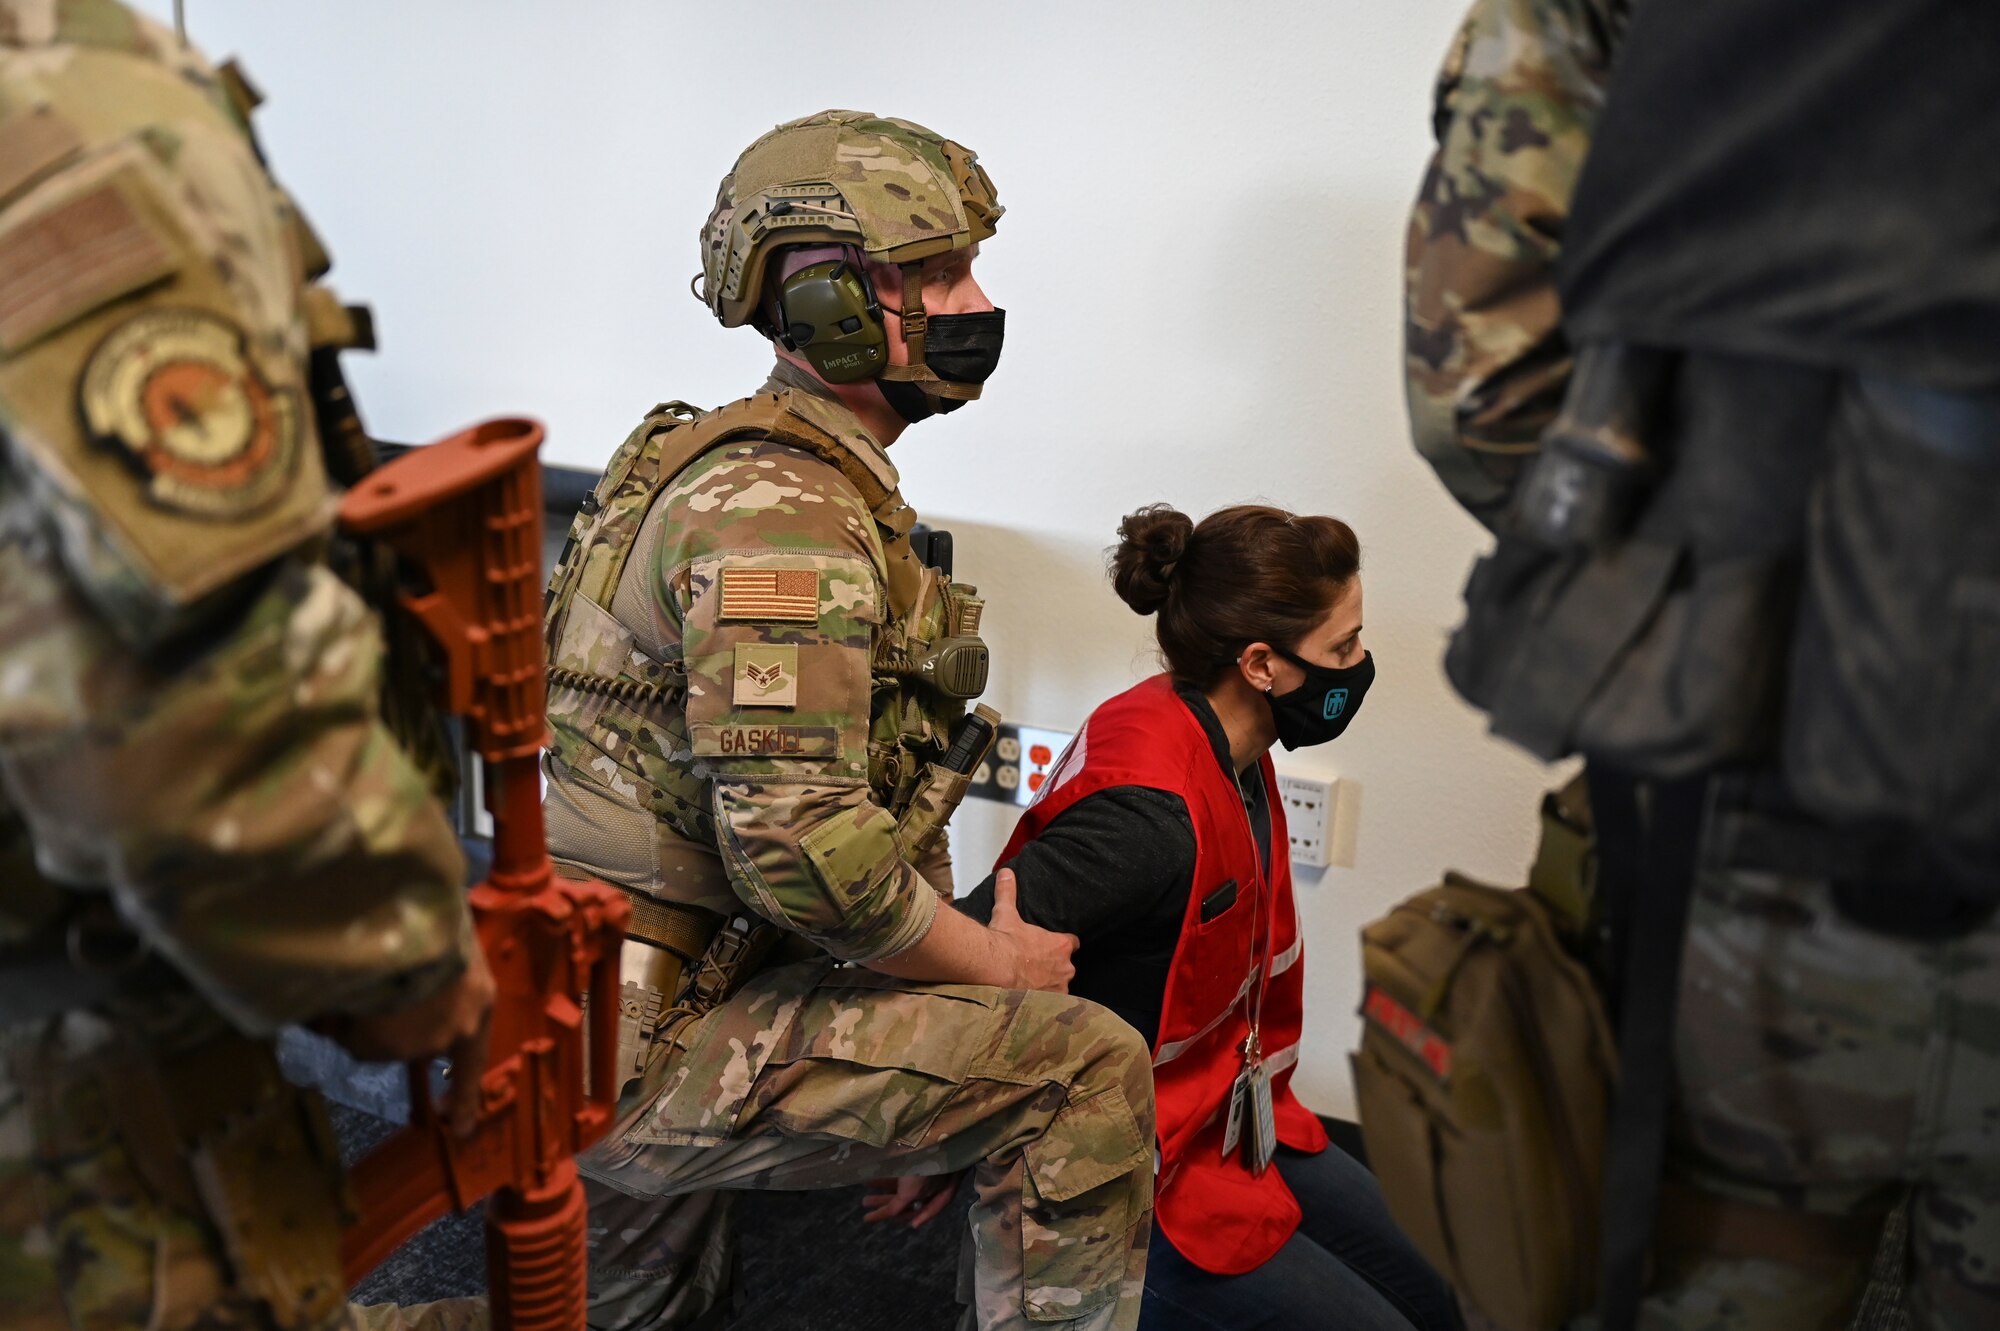 KAFB Security Forces participate in an active shooter exercise.